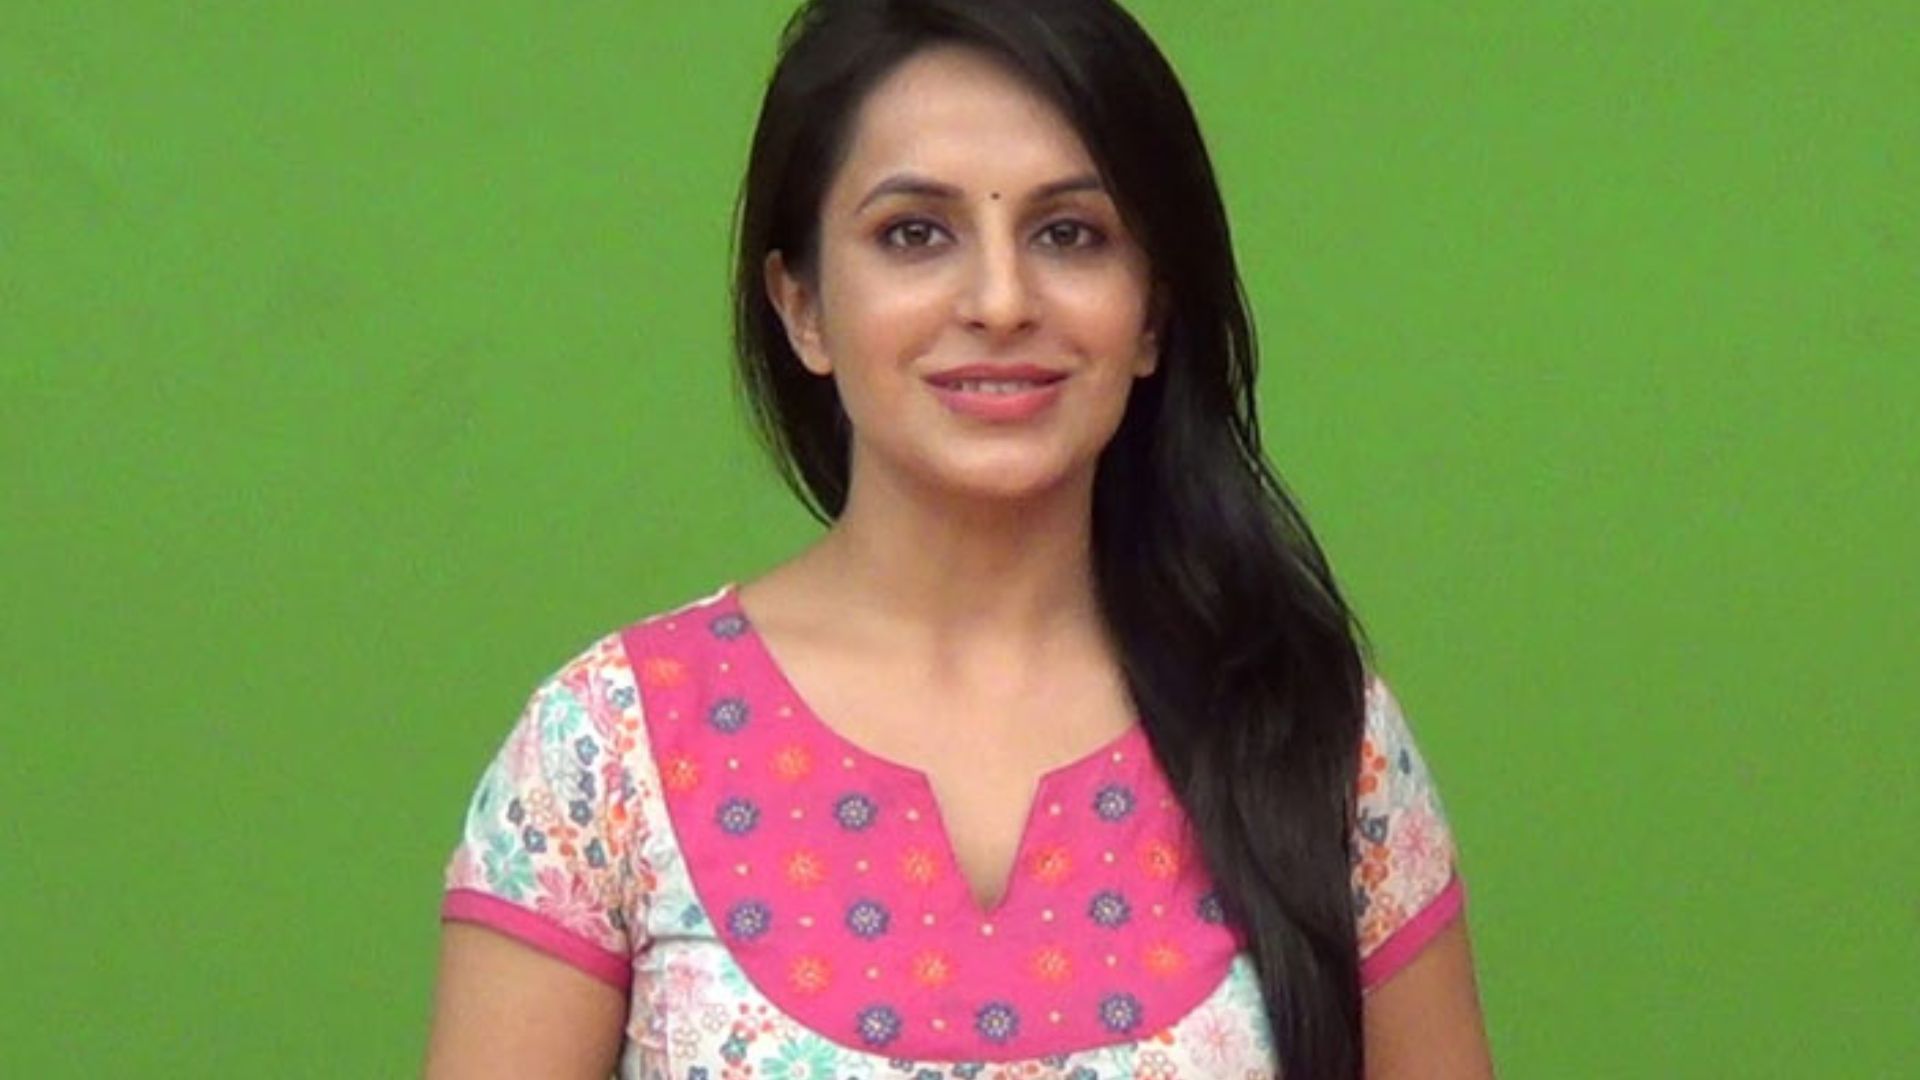 Parakh Madan - An Indian Film And Television Actress Known For Television Shows